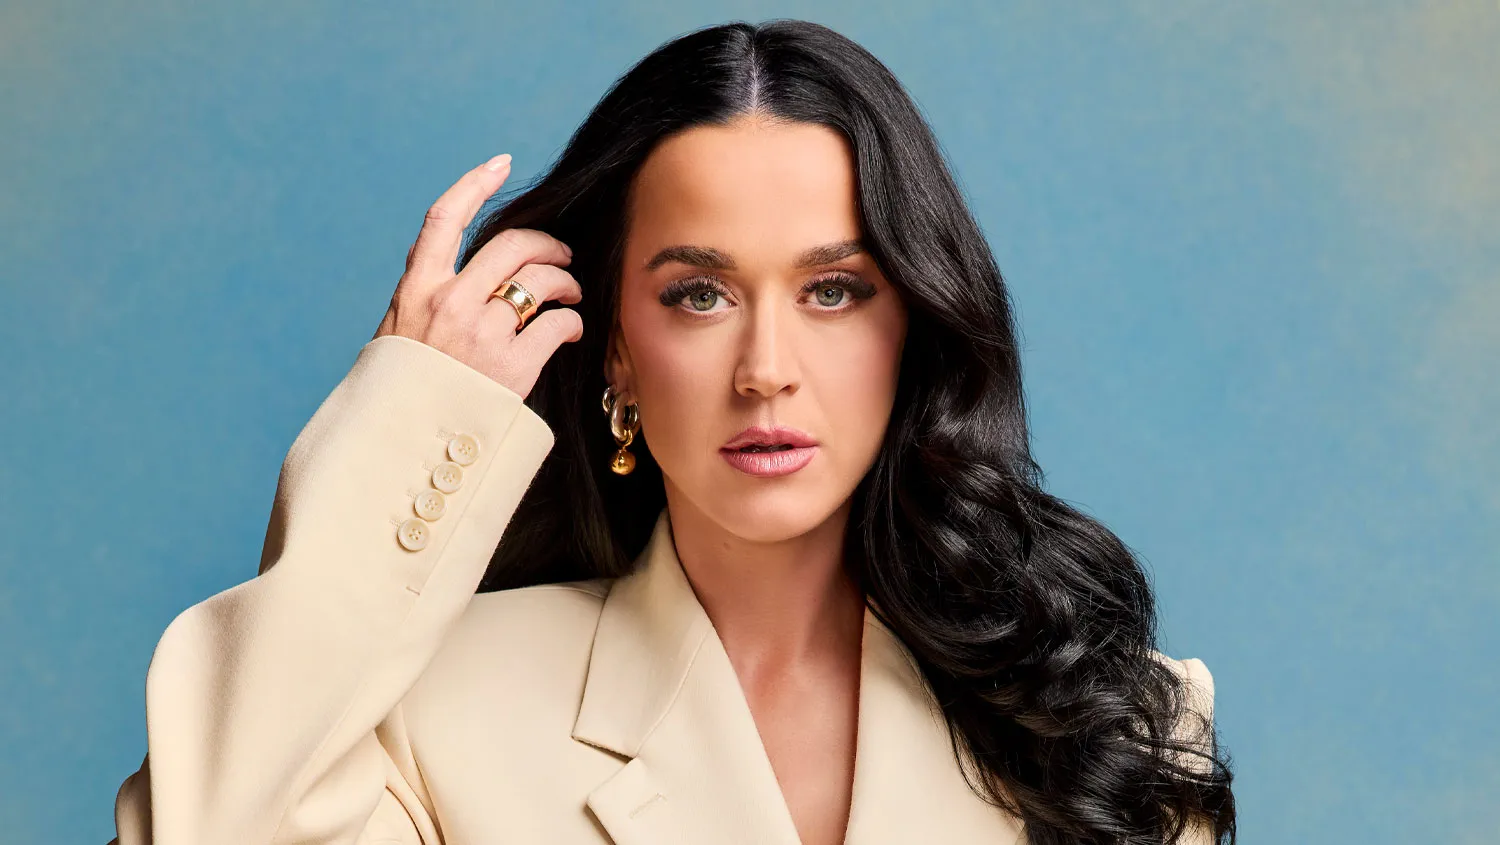 Katy Perry Announces Departure From ‘American Idol’ After 7 Years